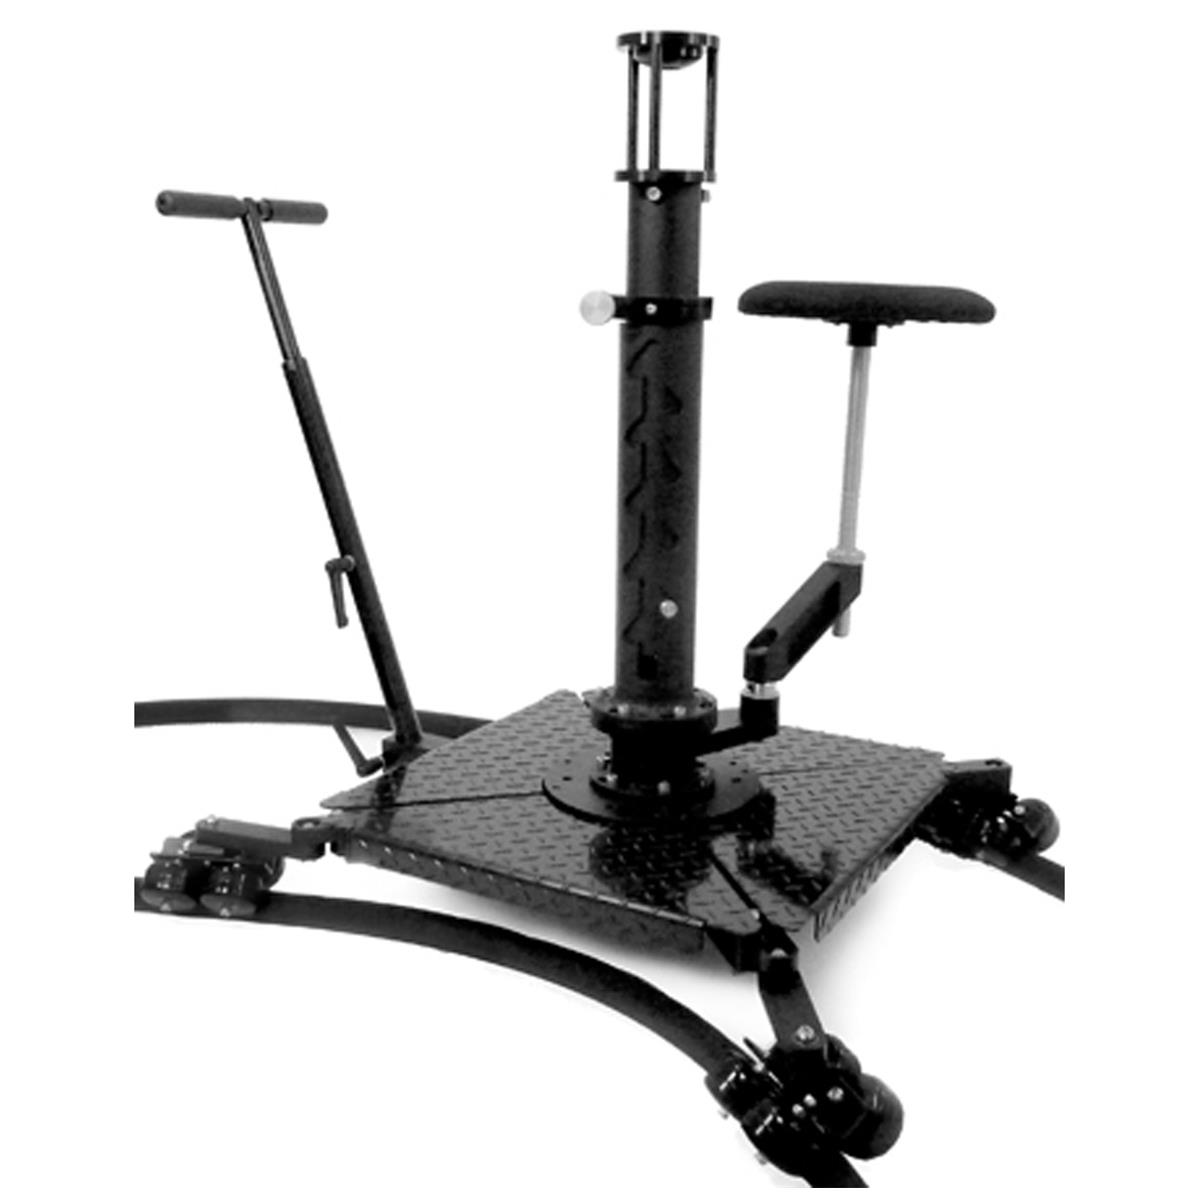 Image of Porta-Jib 4-Leg Rideable Spider Dolly with Track Wheels